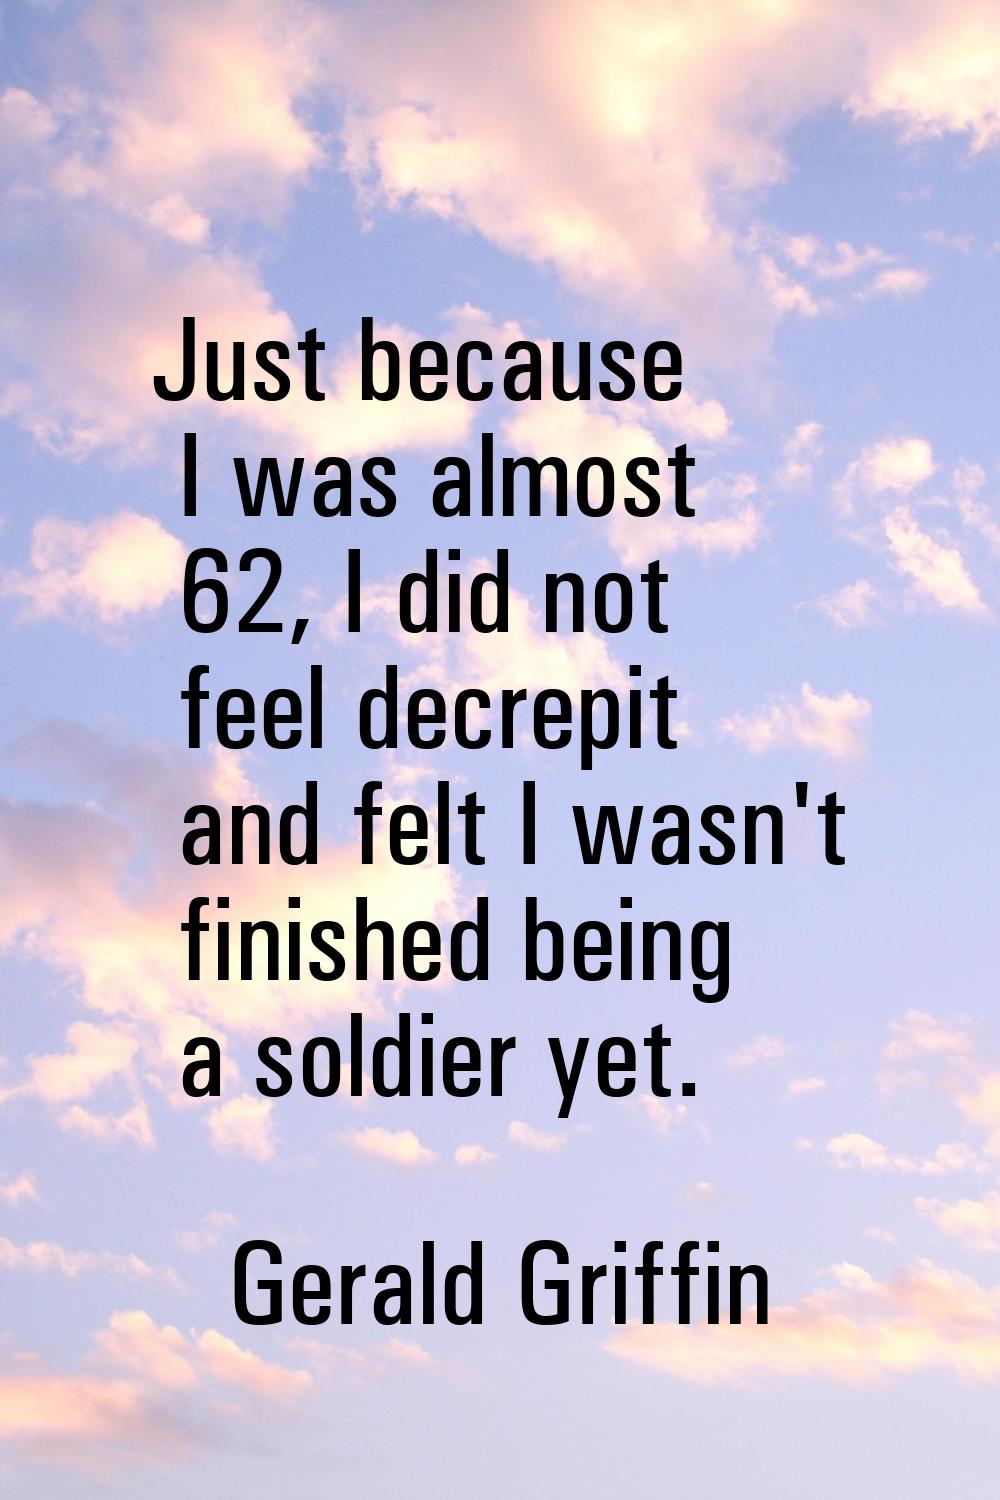 Just because I was almost 62, I did not feel decrepit and felt I wasn't finished being a soldier ye